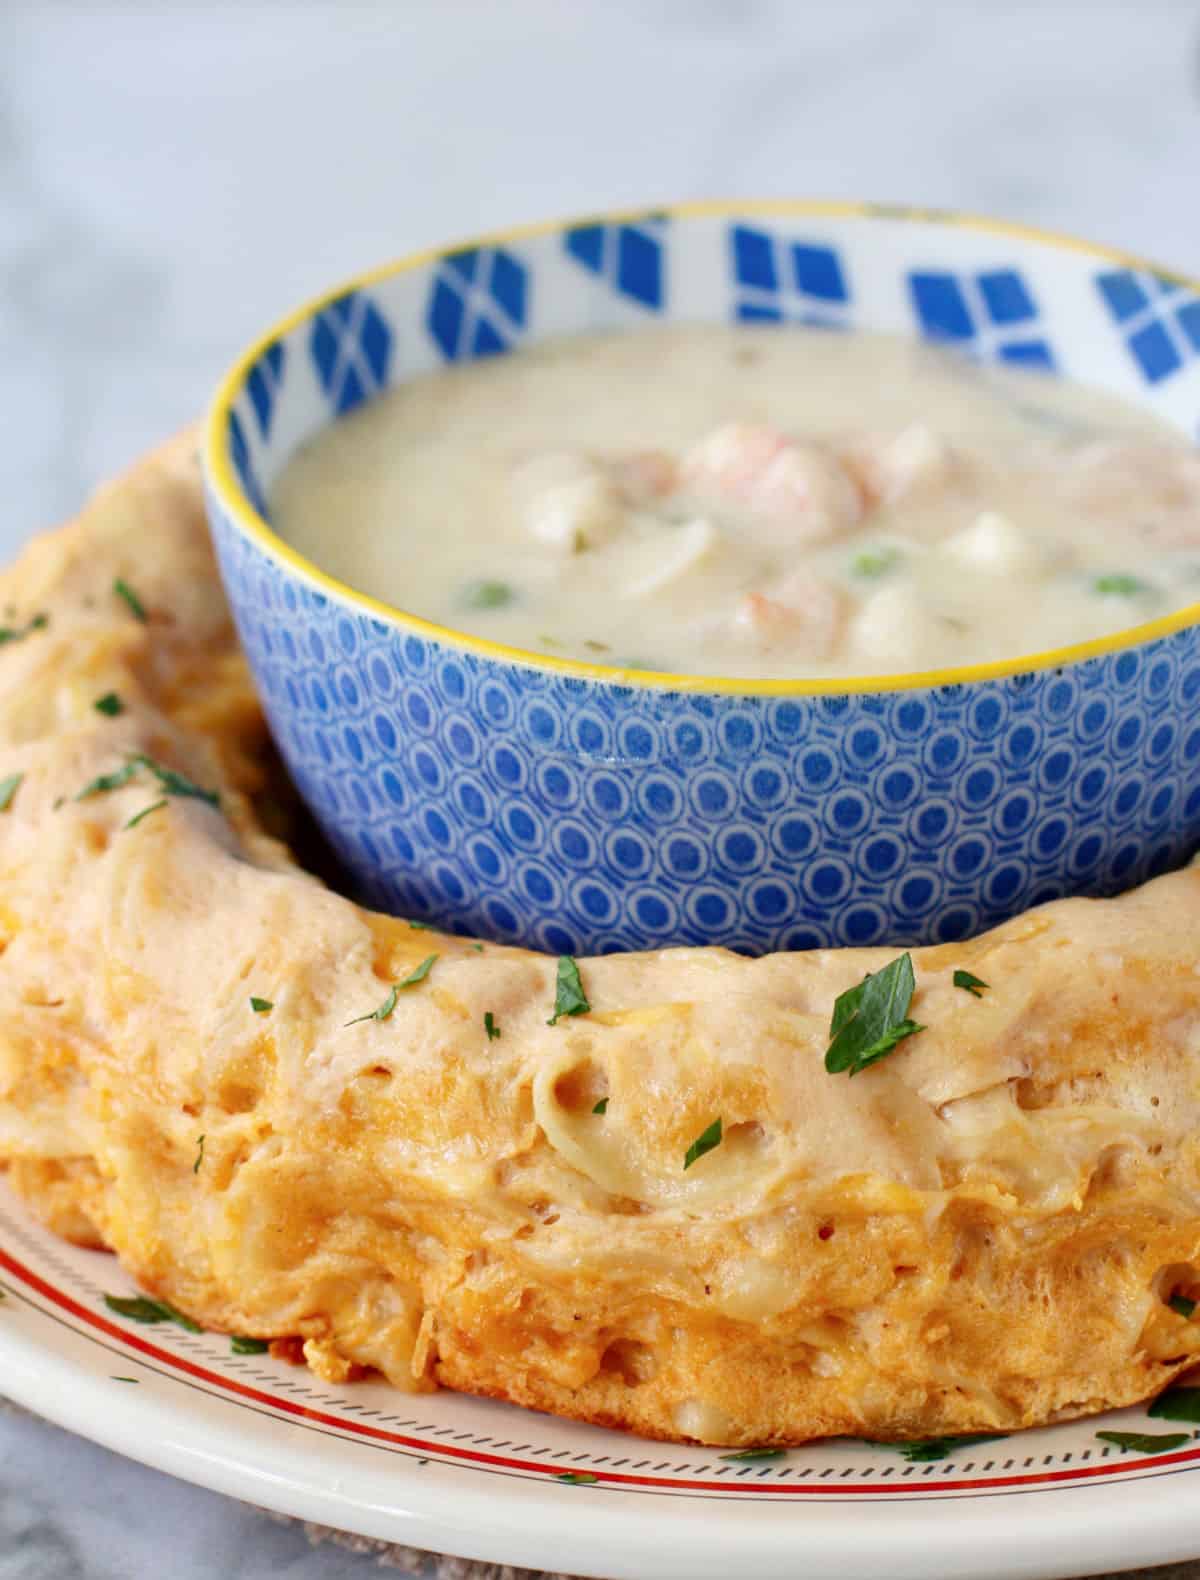 Cheesy Noodle Ring with a bowl of cream shrimp in the middle.